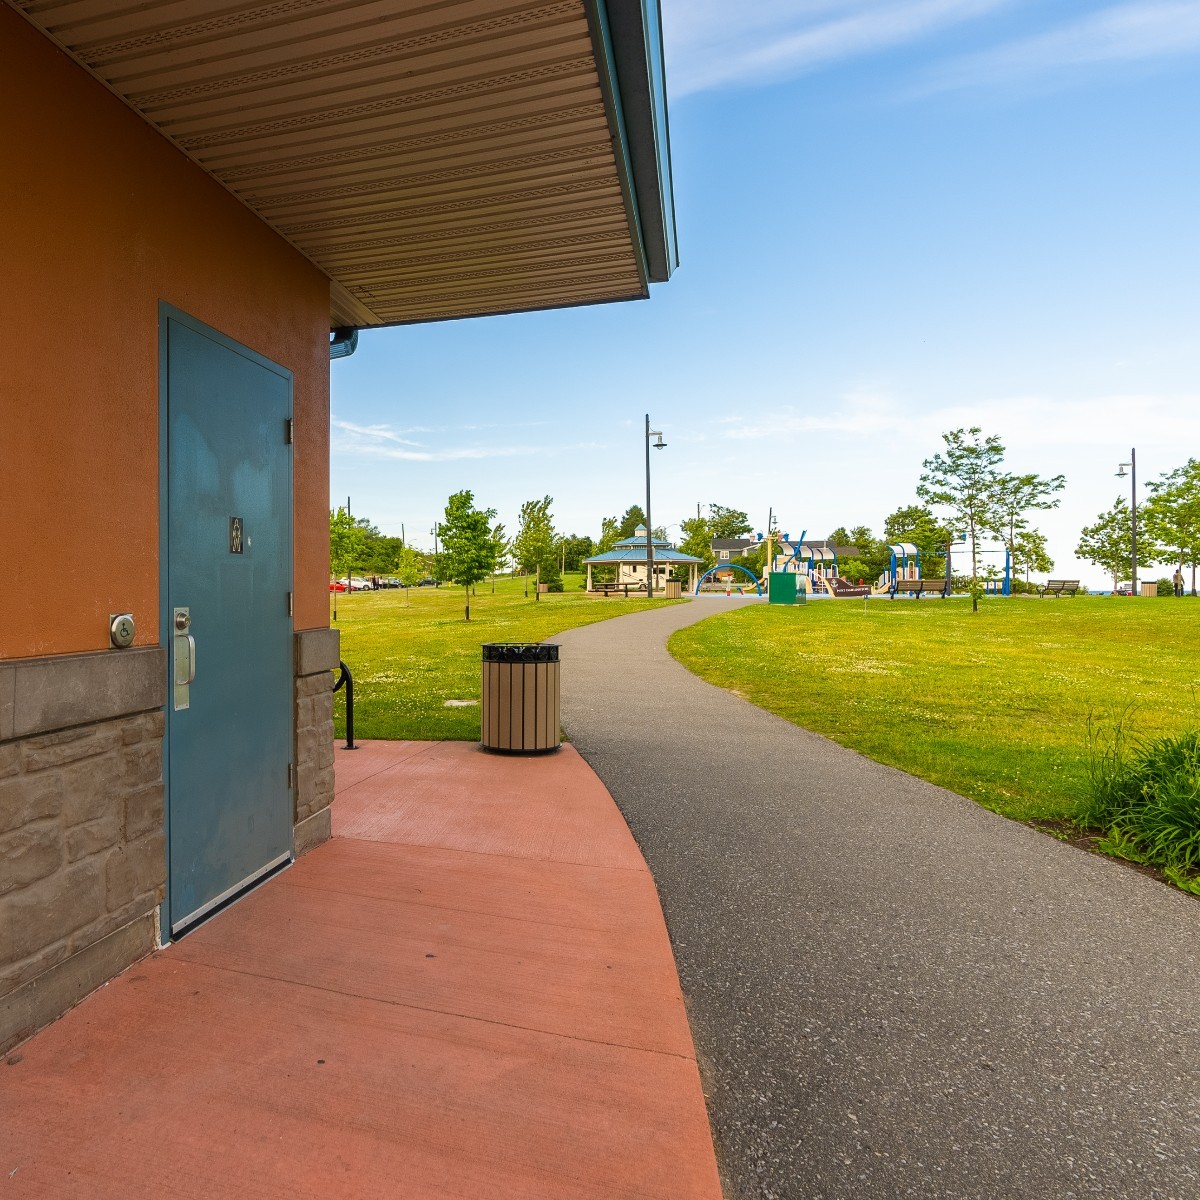 Permanent park washrooms are open for the season! 🚻🚽 Seasonal portable toilets have also been installed at additional park locations this year.

Search for parks with seasonal washrooms: brnw.ch/21wKdL2 ⬅️